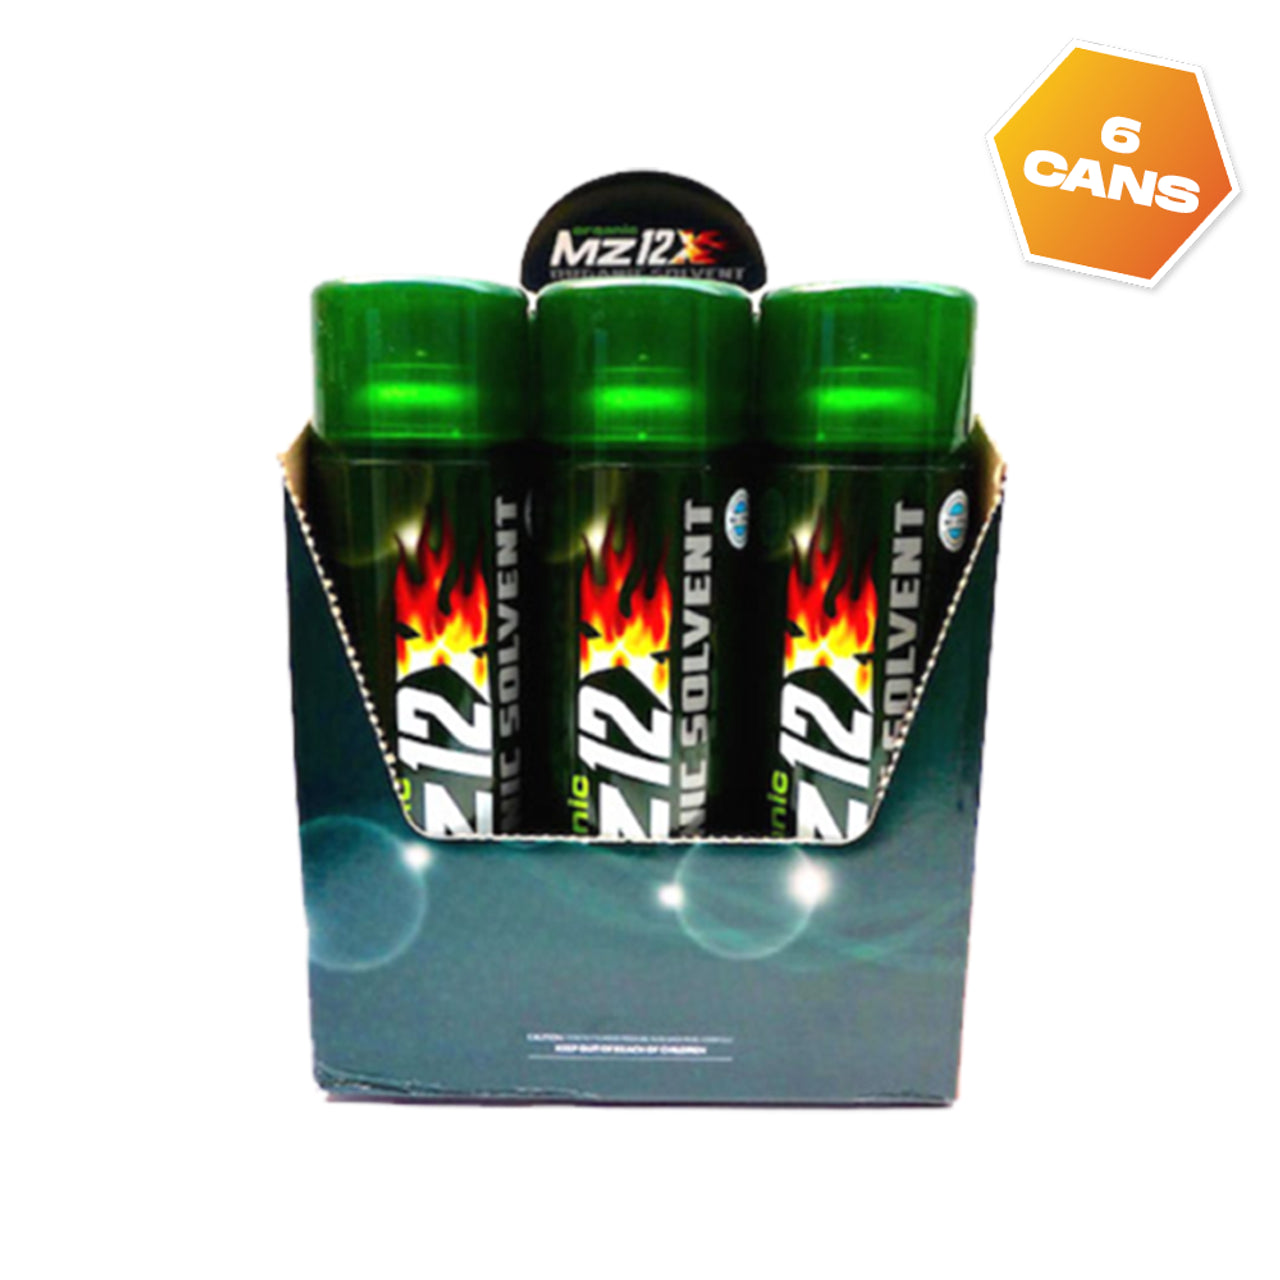 MZ12X Organic Solvent Cans